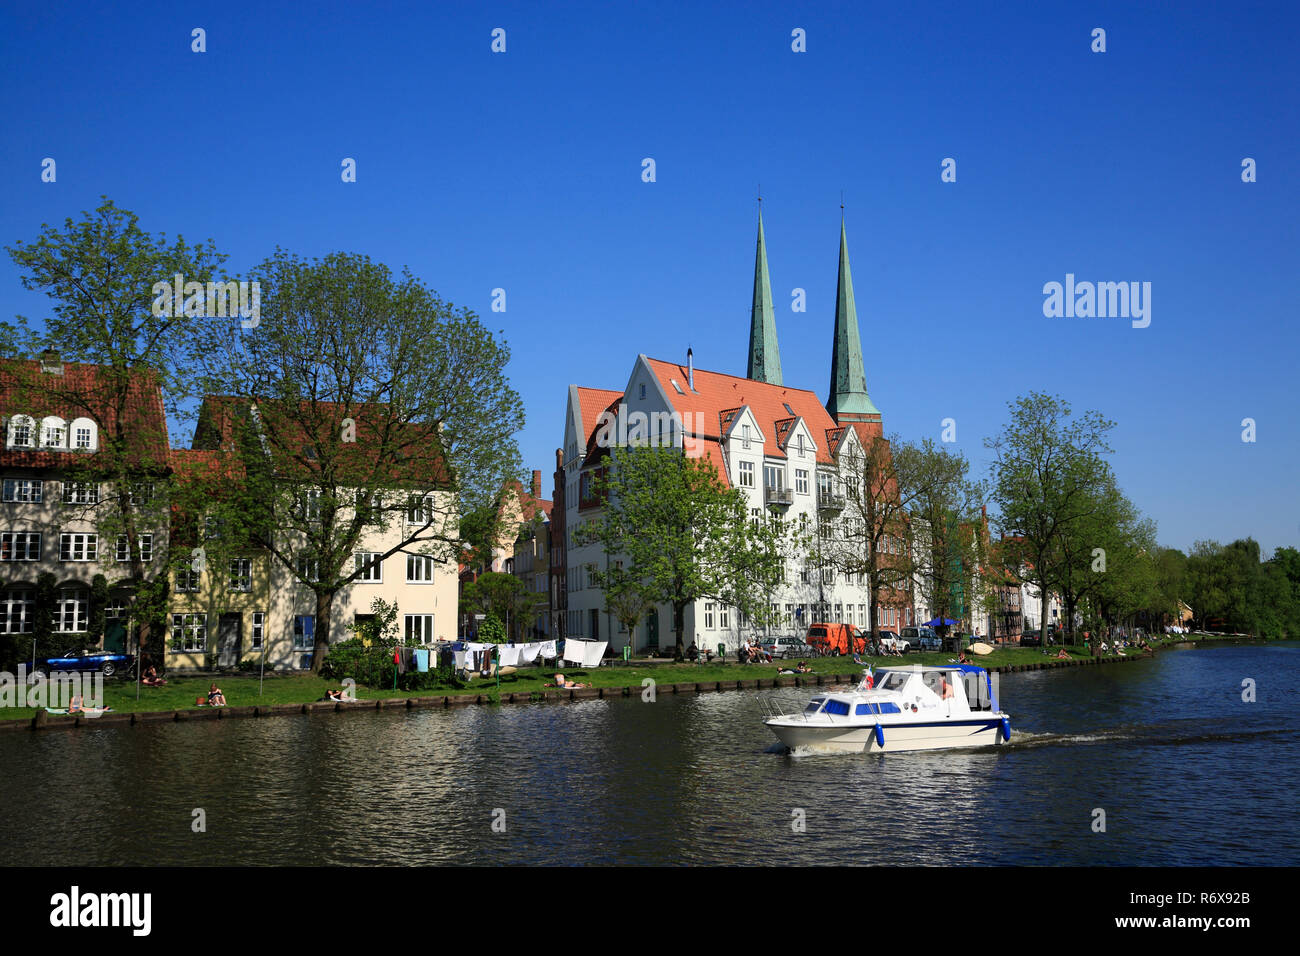 View across Obertrave river, Lübeck, Luebeck, Schleswig-Holstein, Germany, Europe Stock Photo